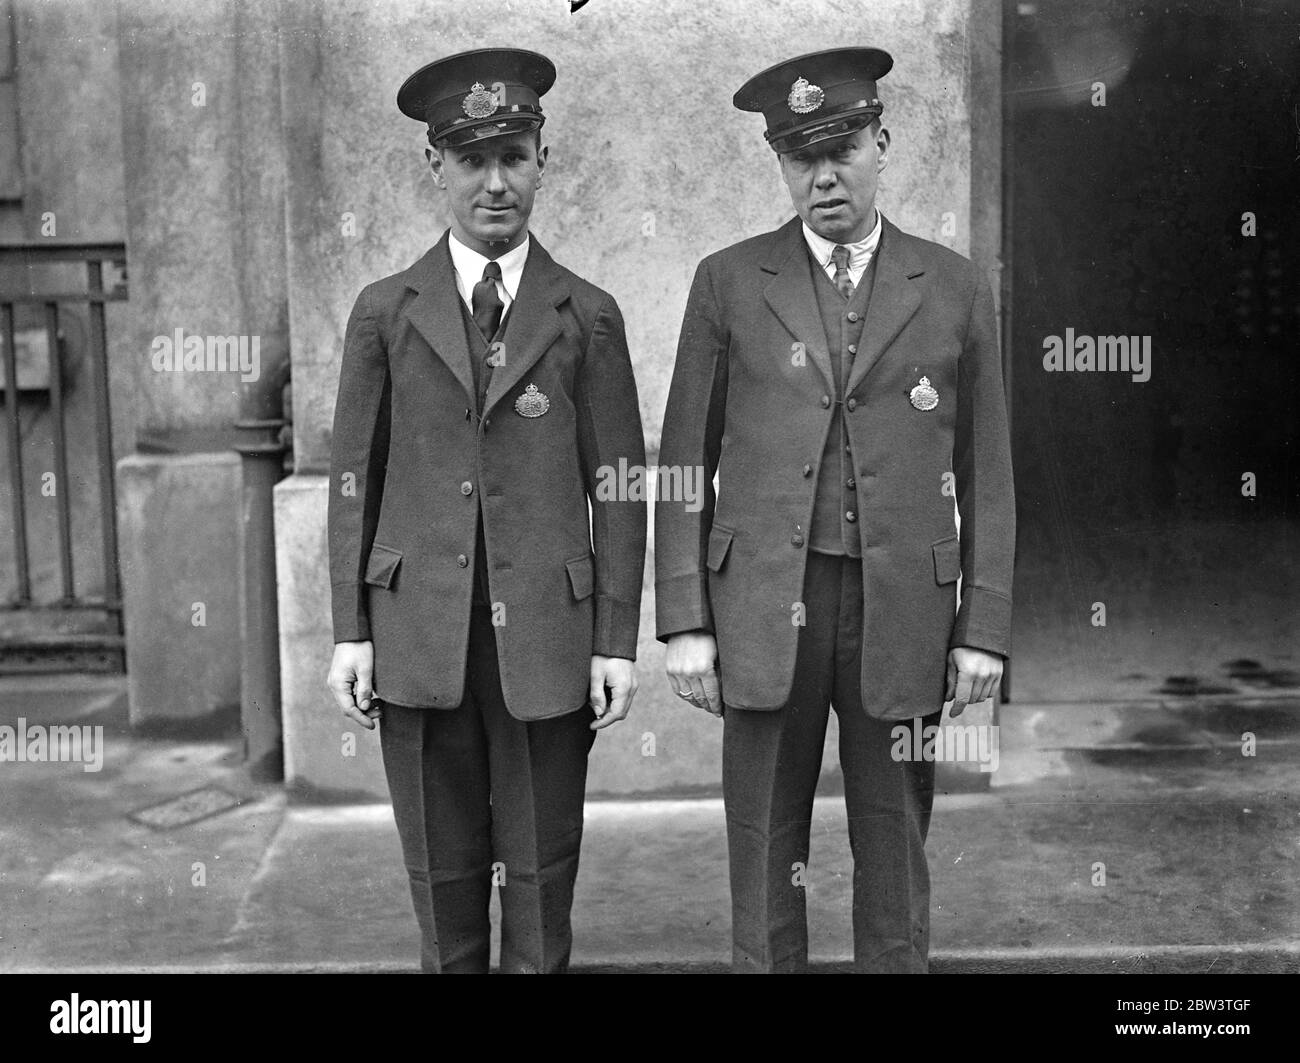 Postmen are to be fashionable ! Tailored uniforms with padded shoulders . In future , postmen are to look much smarter . New uniforms are tailored and the shoulders are padded in accordance with the latest fashion . [ 1936 ?] Stock Photo